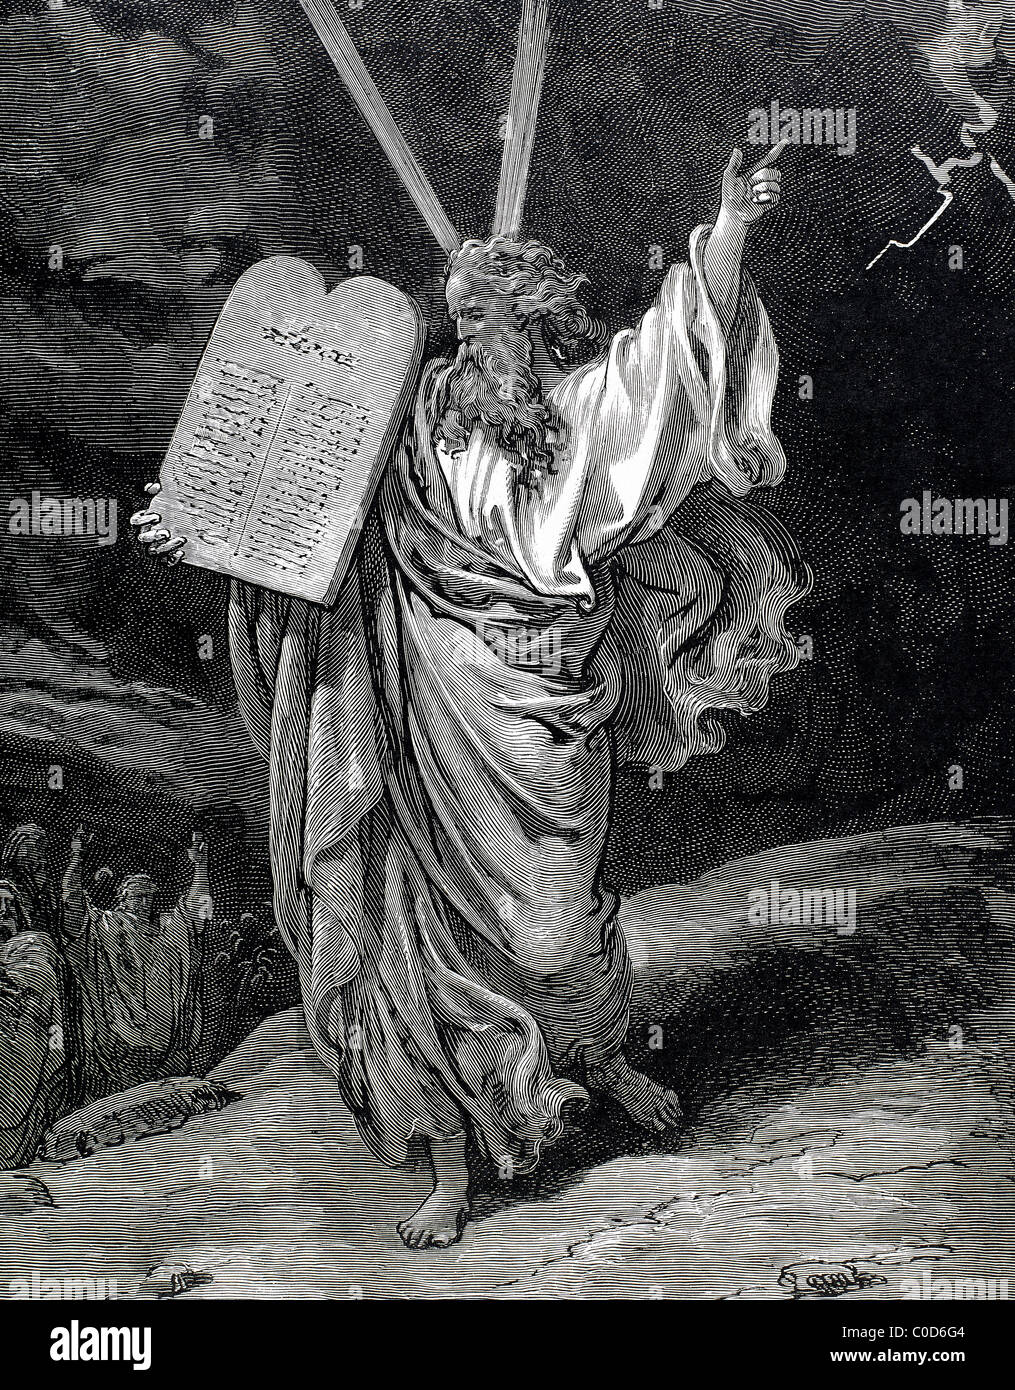 Moses received the Tablets of Law. Engraving. Stock Photo